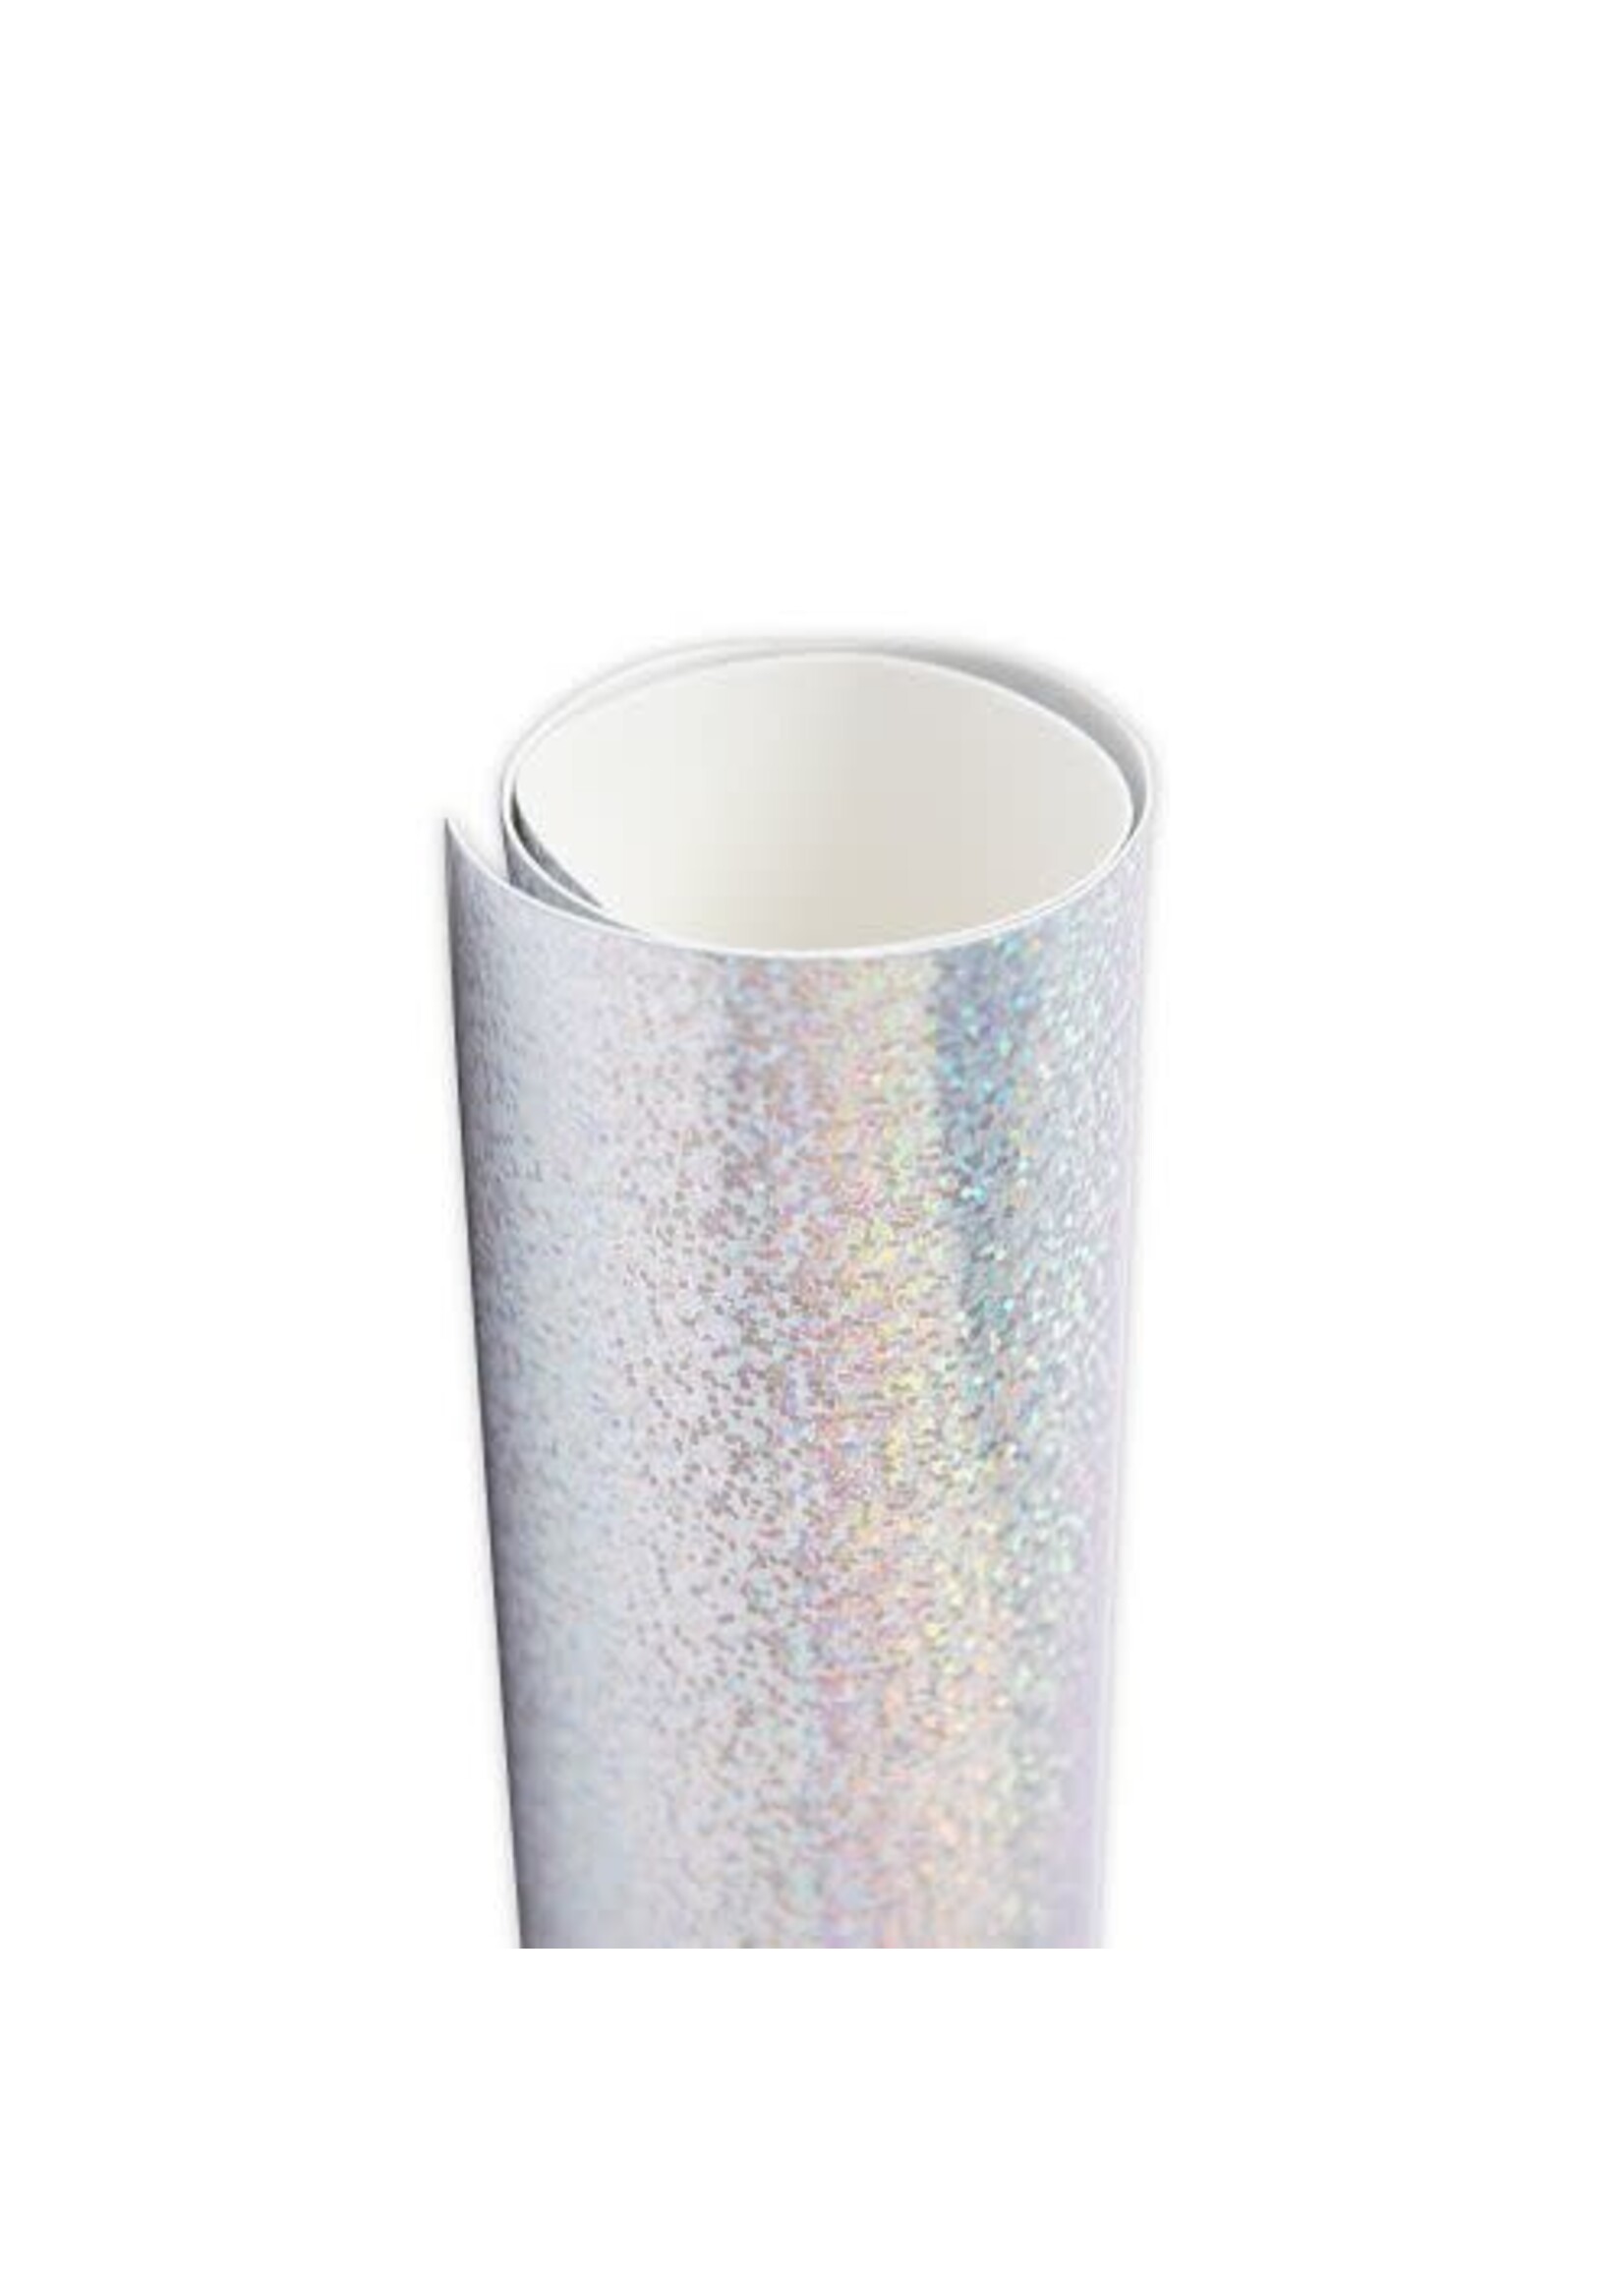 Sizzix Texture Roll: Holographic